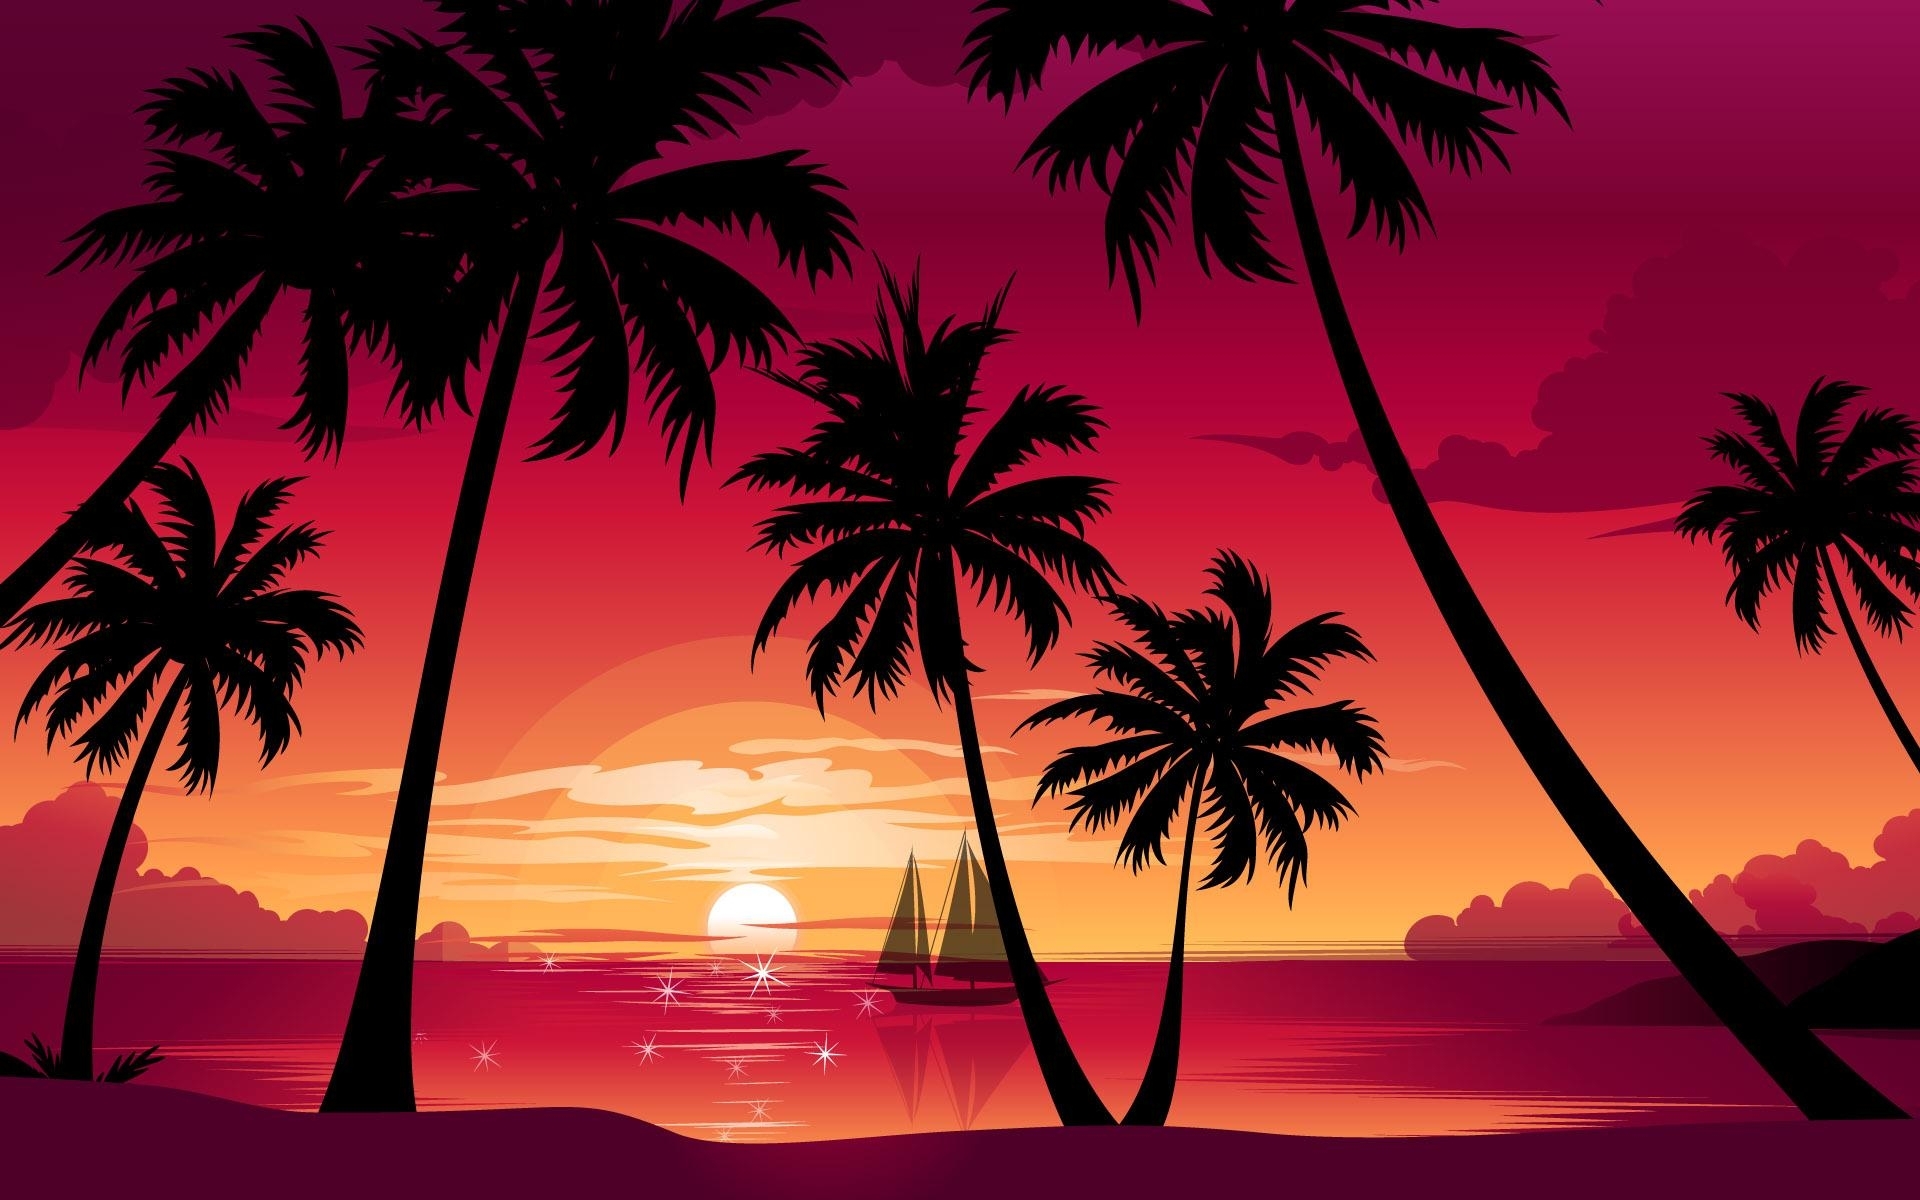 pictures, palms, sunset, red, landscape 2160p